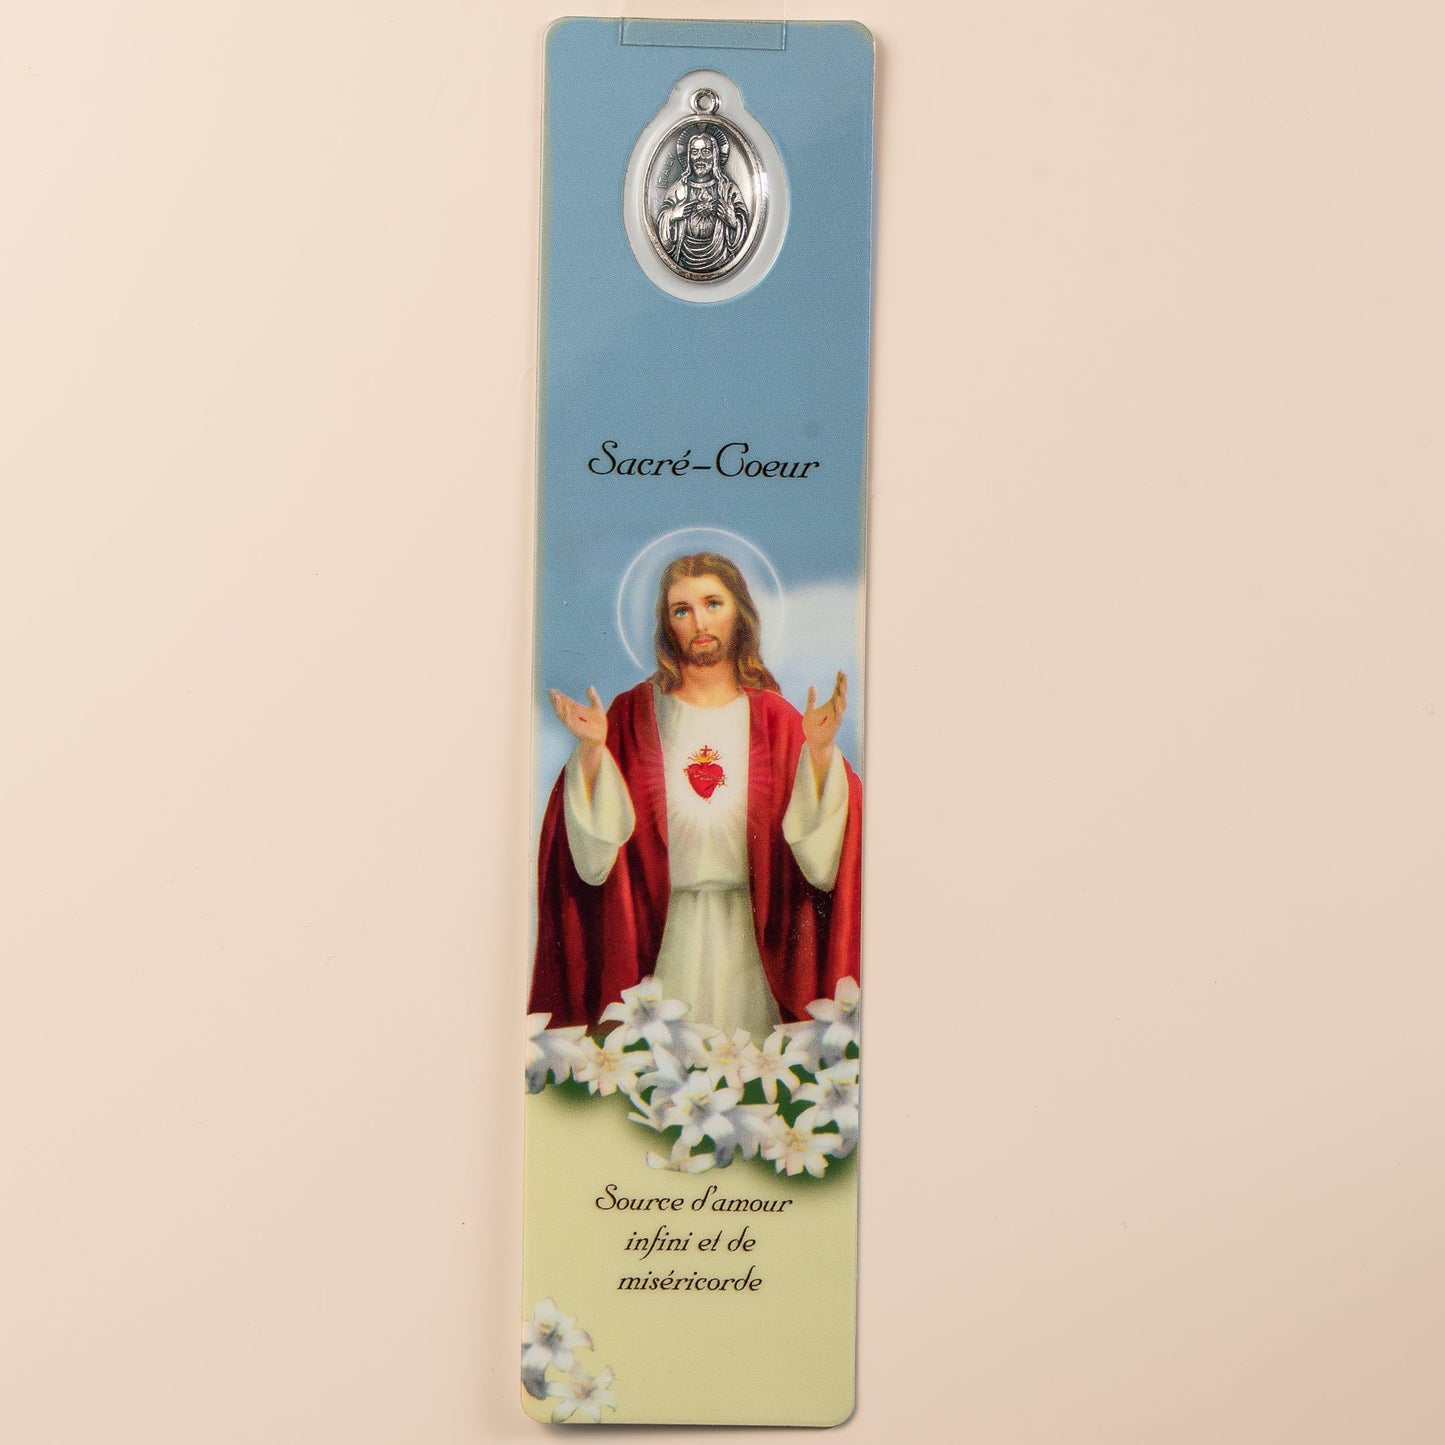 Bookmark of the Sacred Heart of Jesus